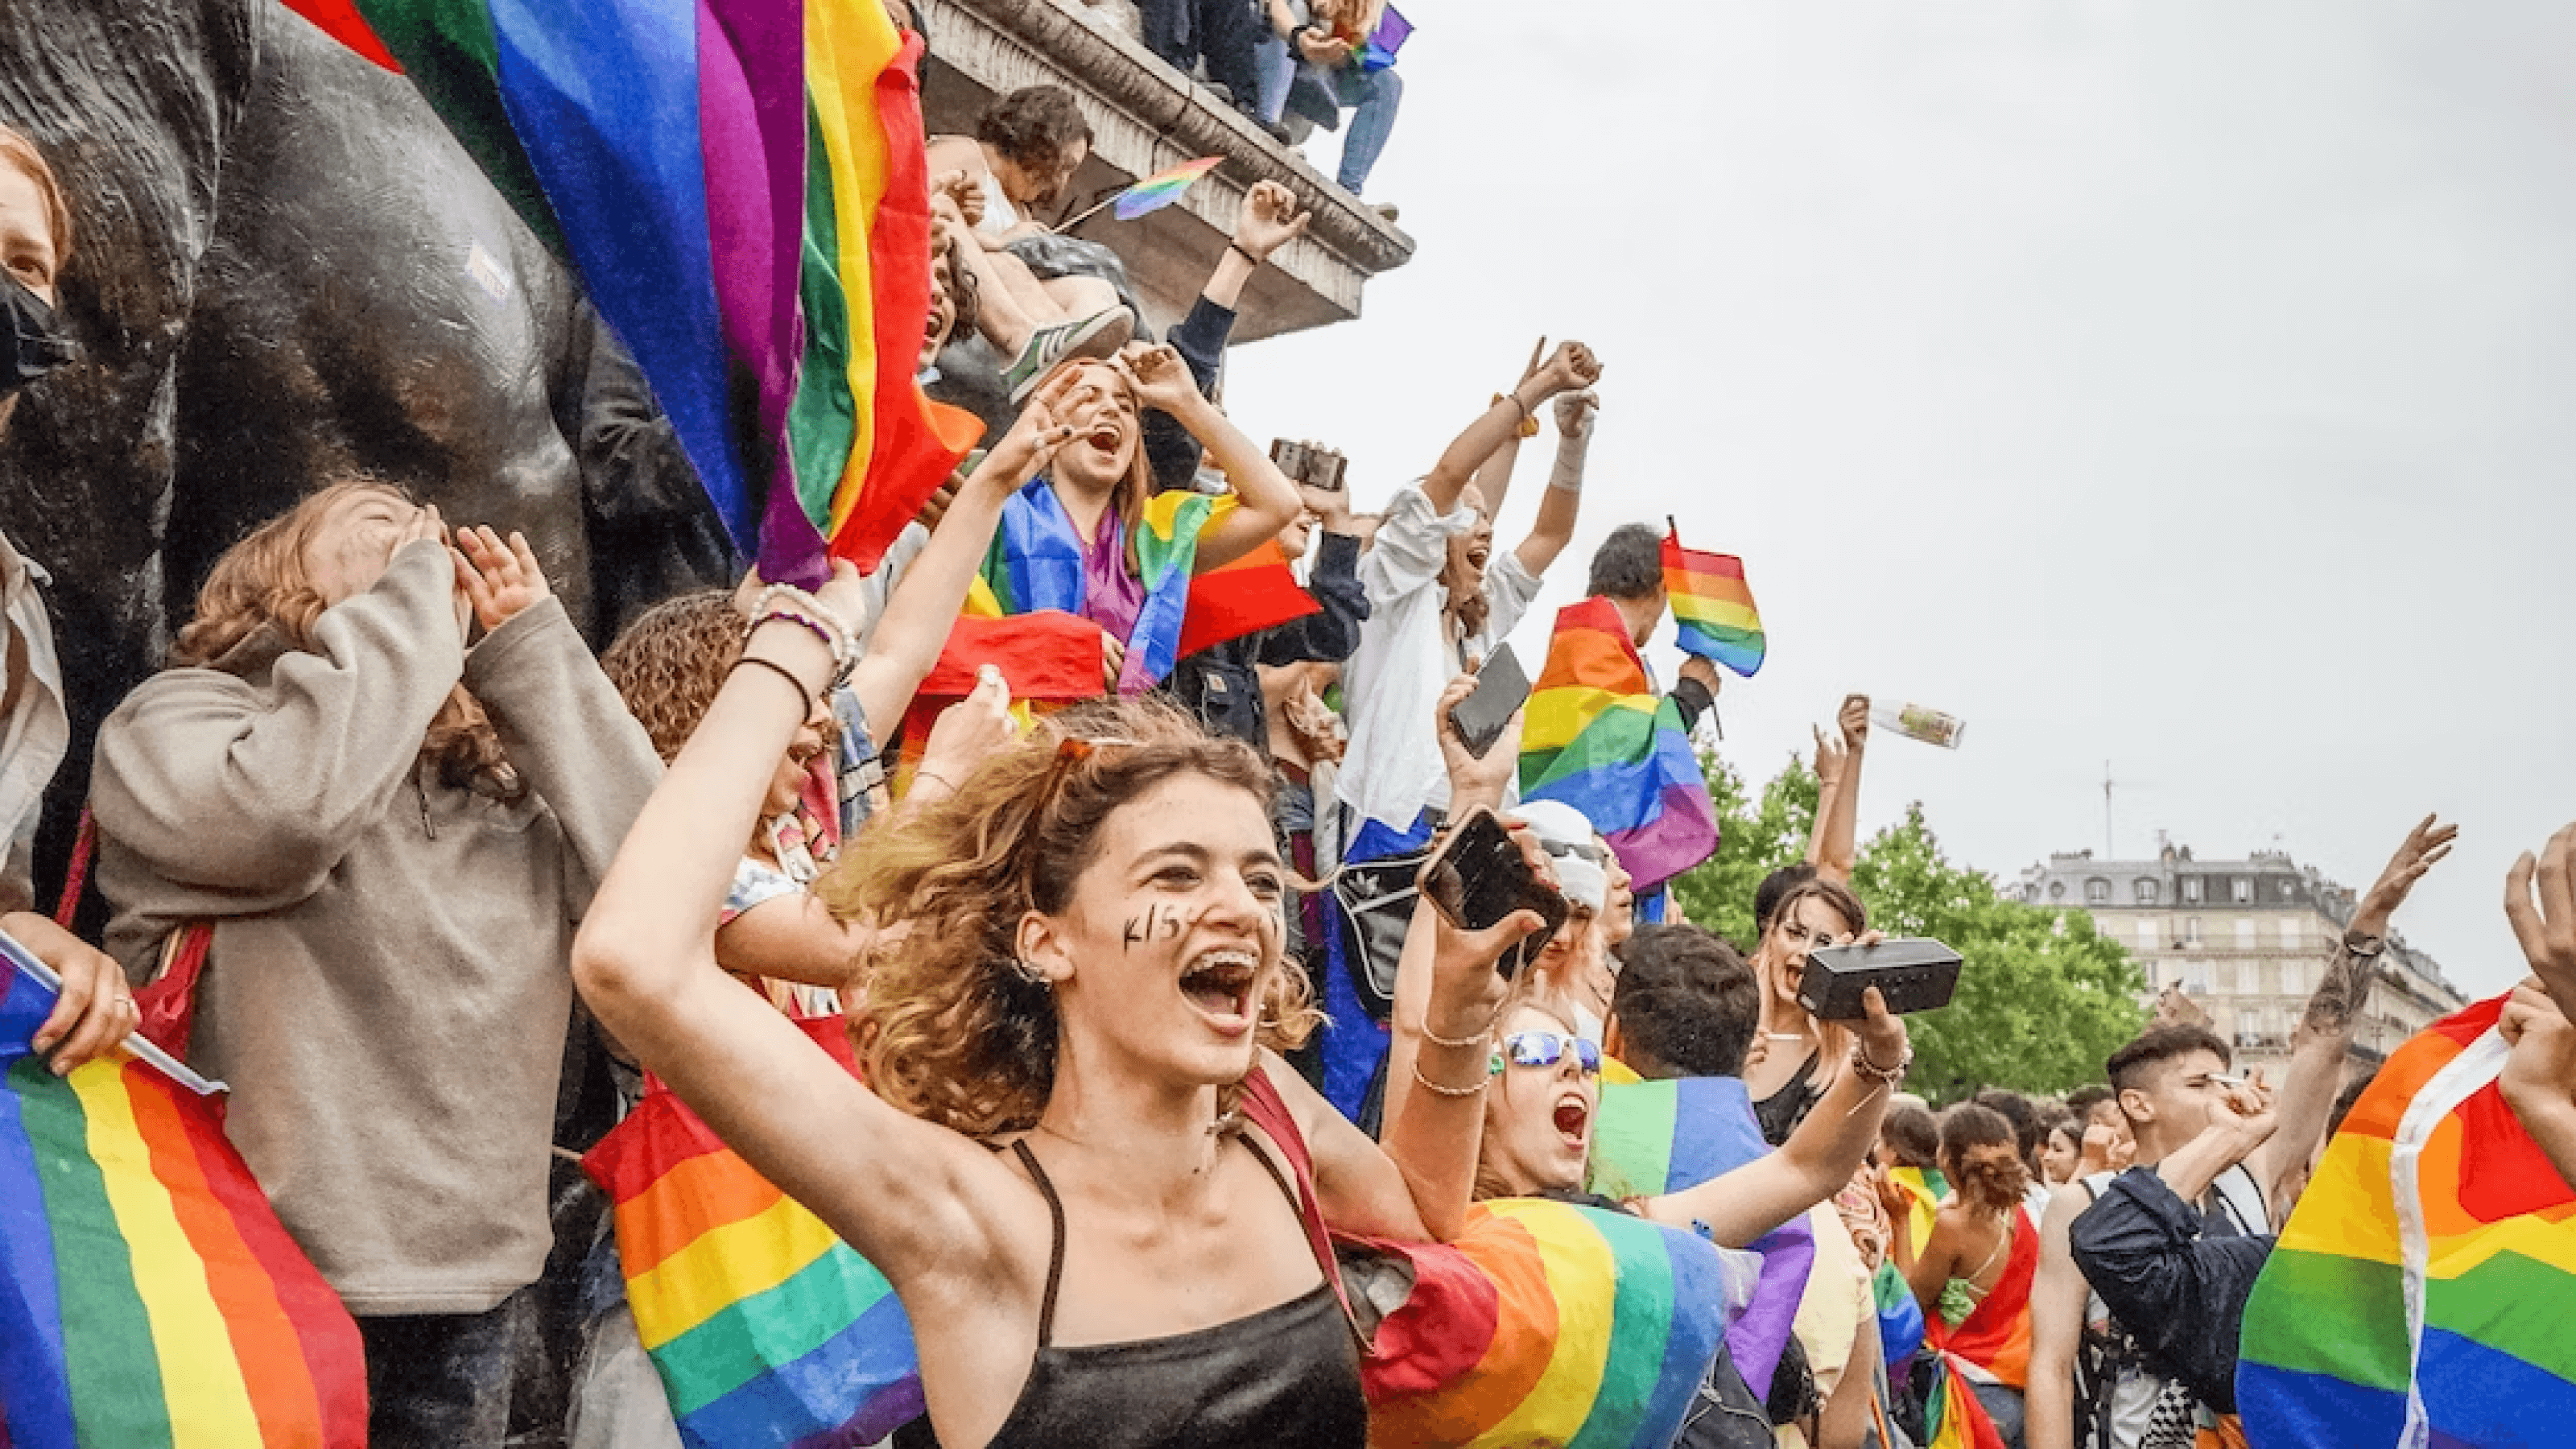 Best-dressed people and outfit trends at Manchester Pride 2023